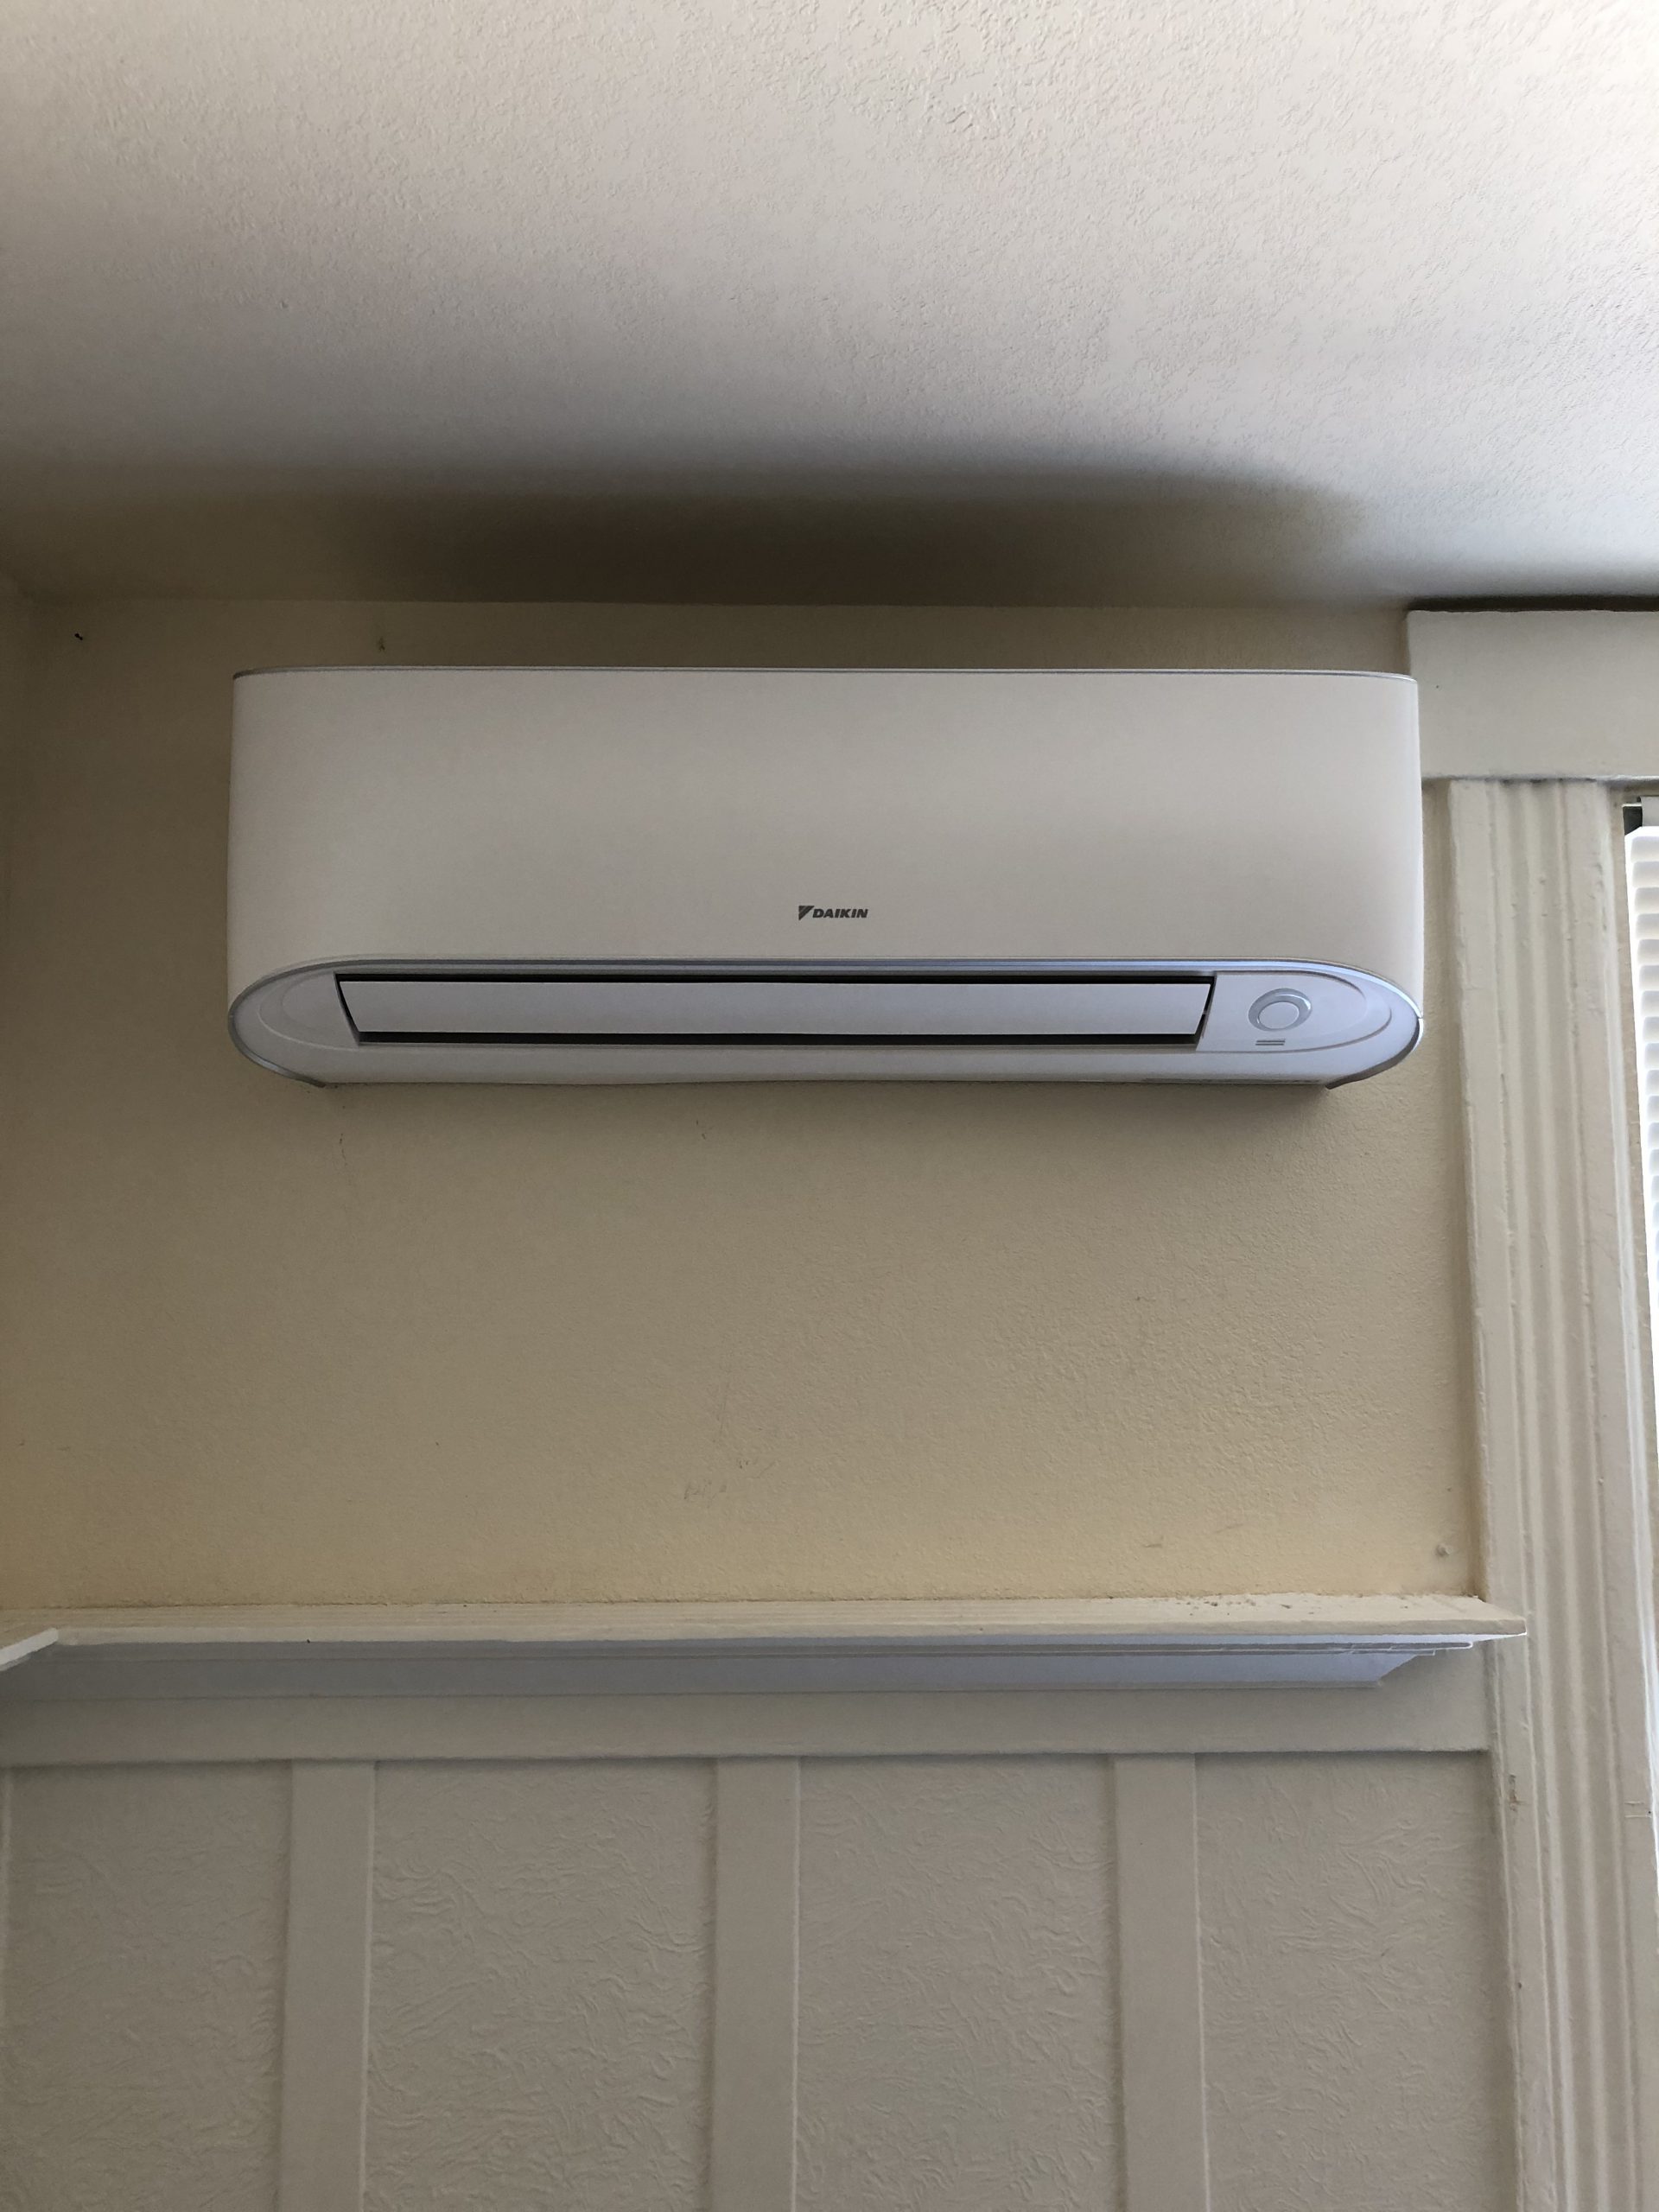 The Pros and Cons of Ductless Mini-Split Systems